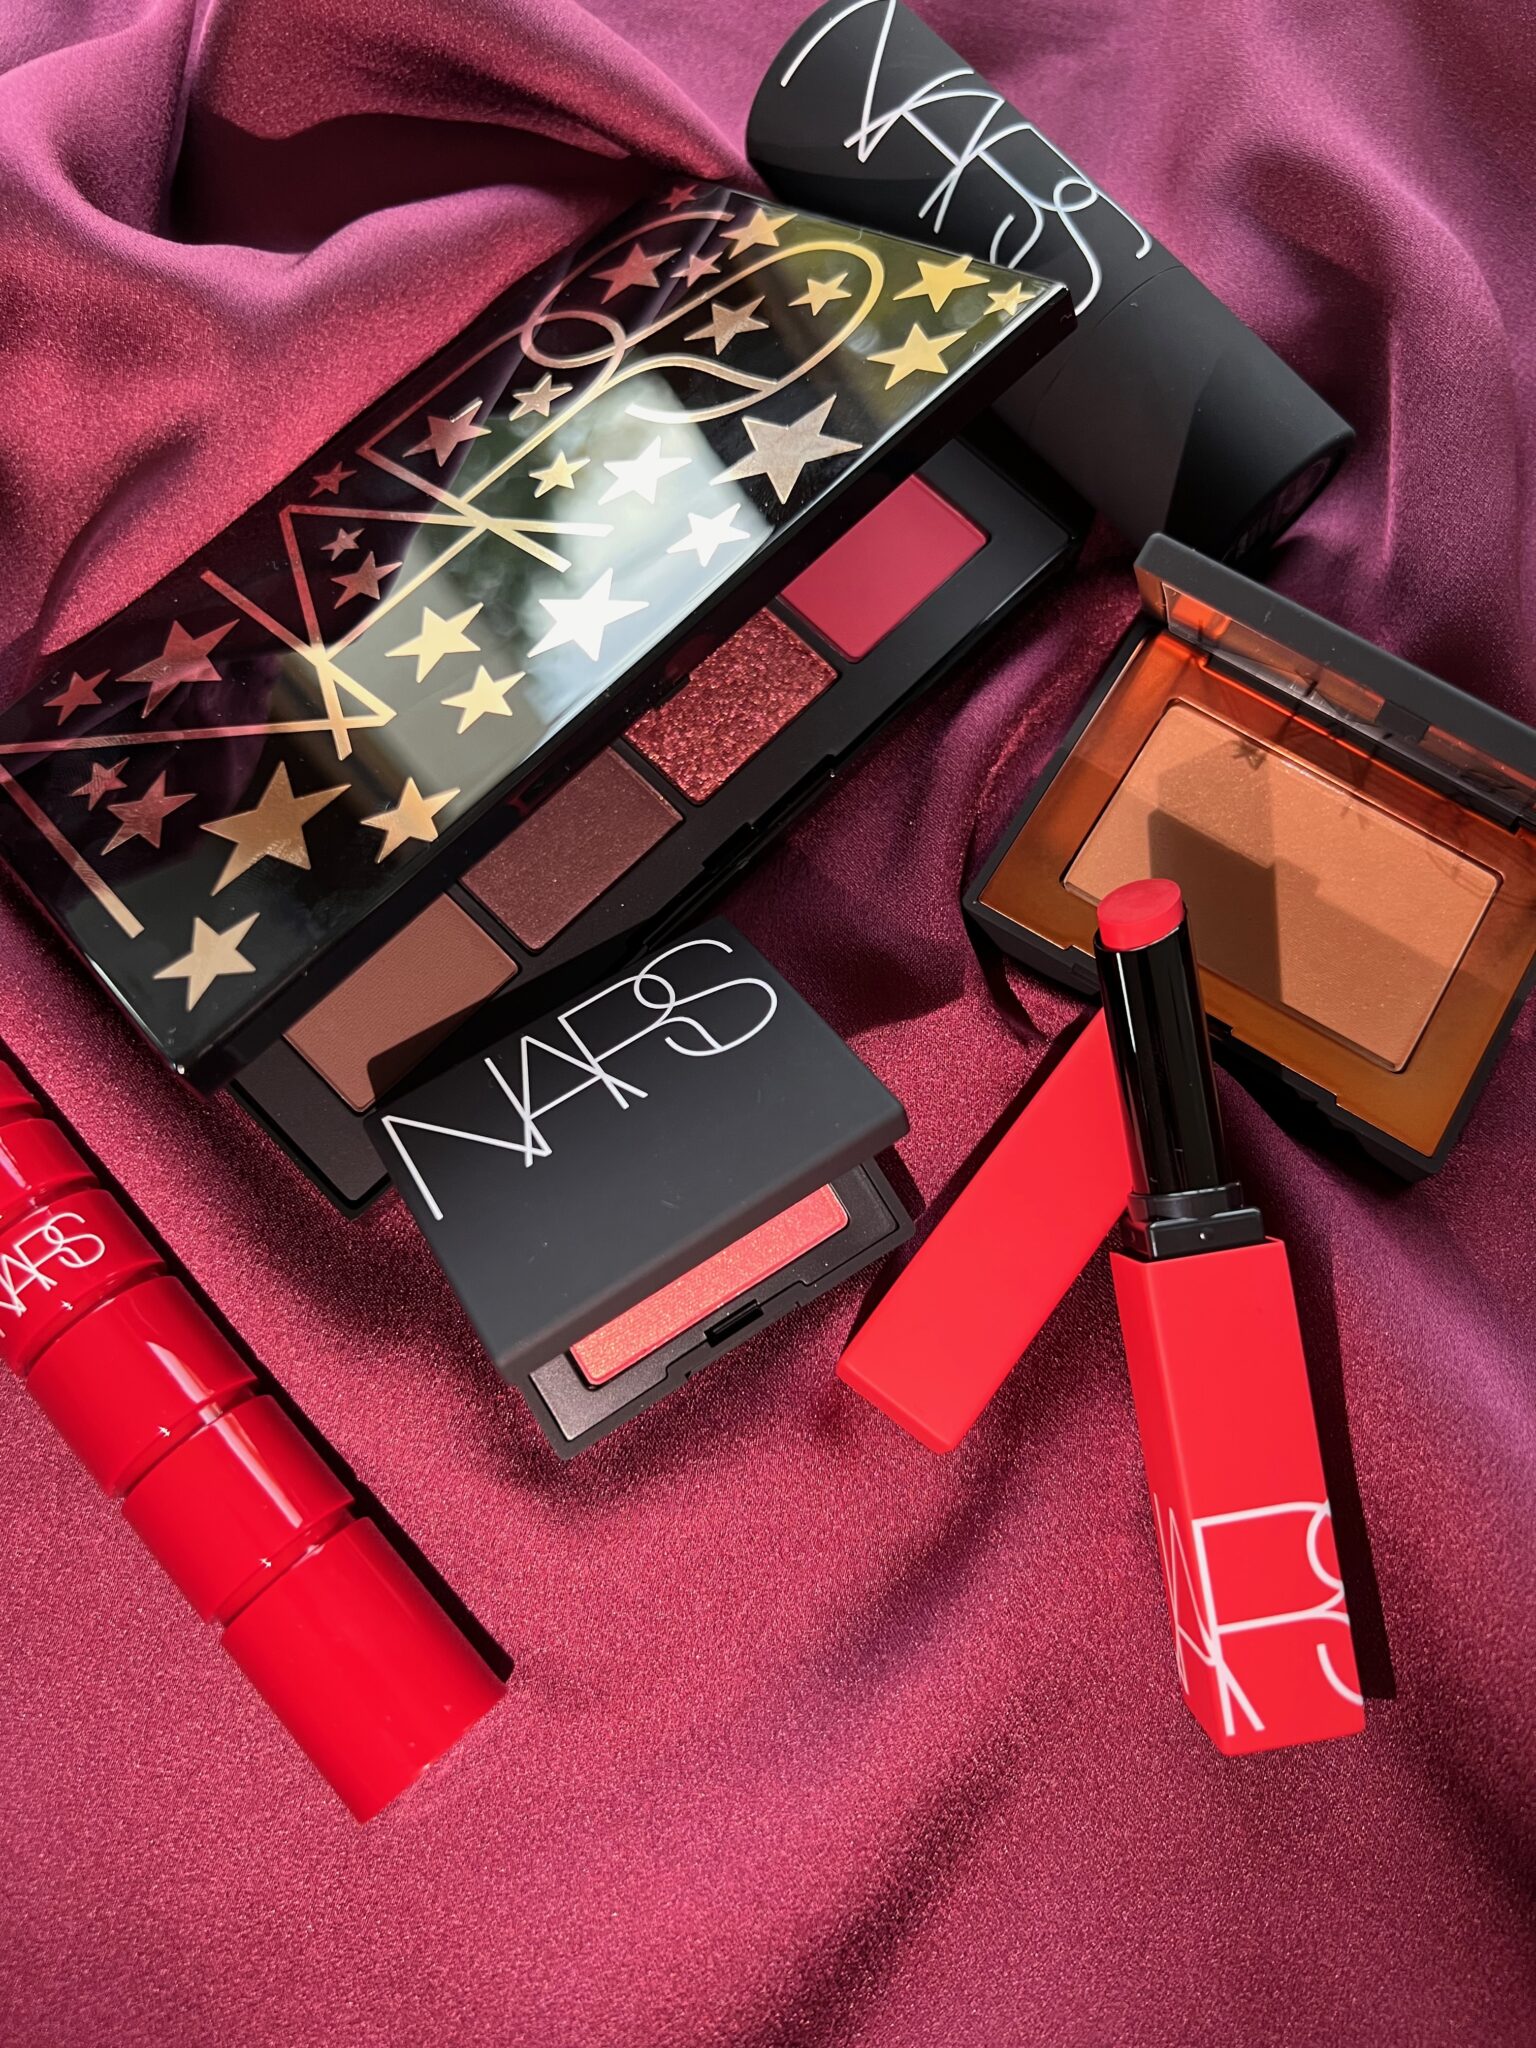 Christmas at Sephora - Top Holiday 2022 Gift Sets For Women. Nars, Sephora, Benefit and more. 2